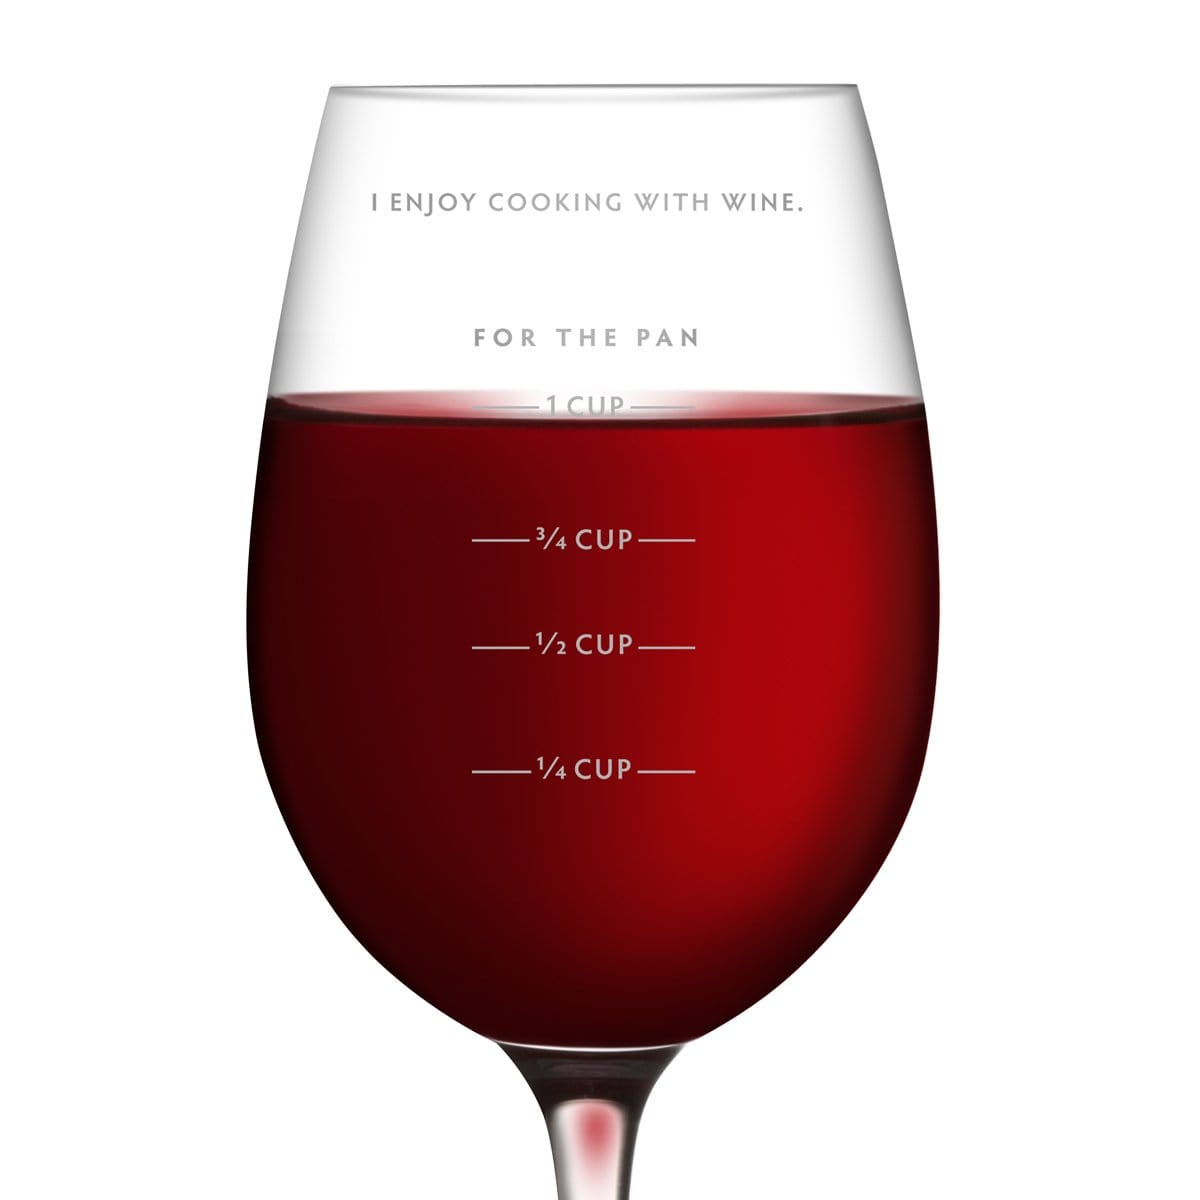 Load image into Gallery viewer, Wine Glass
